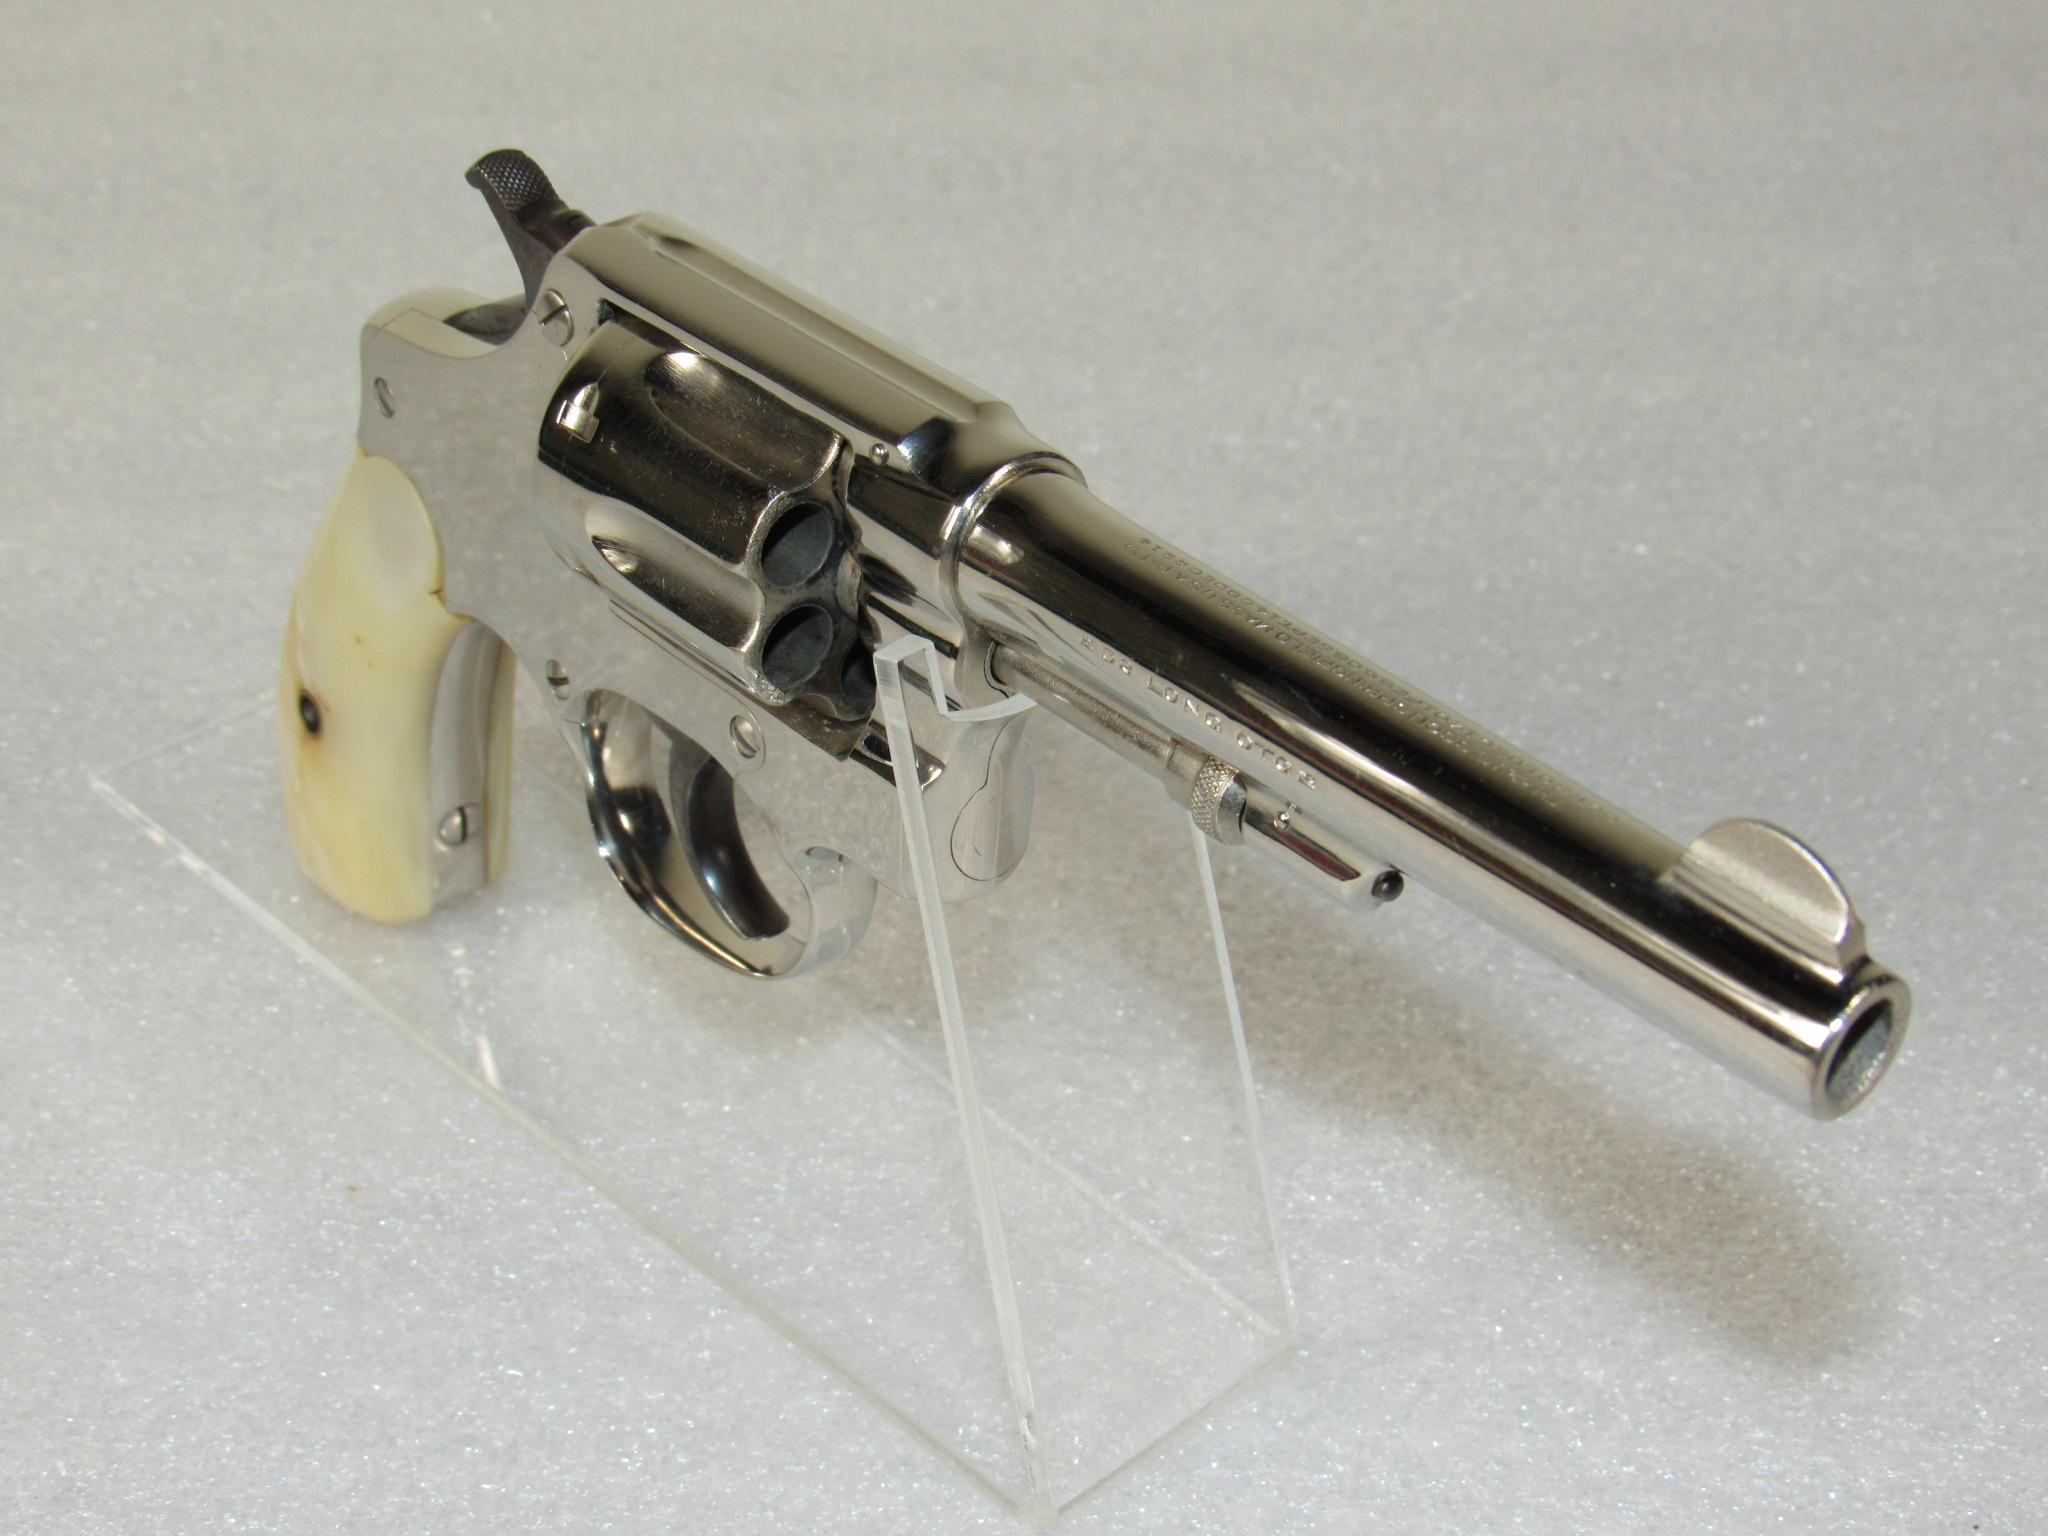 Smith & Wesson .32 Long CTGE Revolver with Mother of Pearl Grips